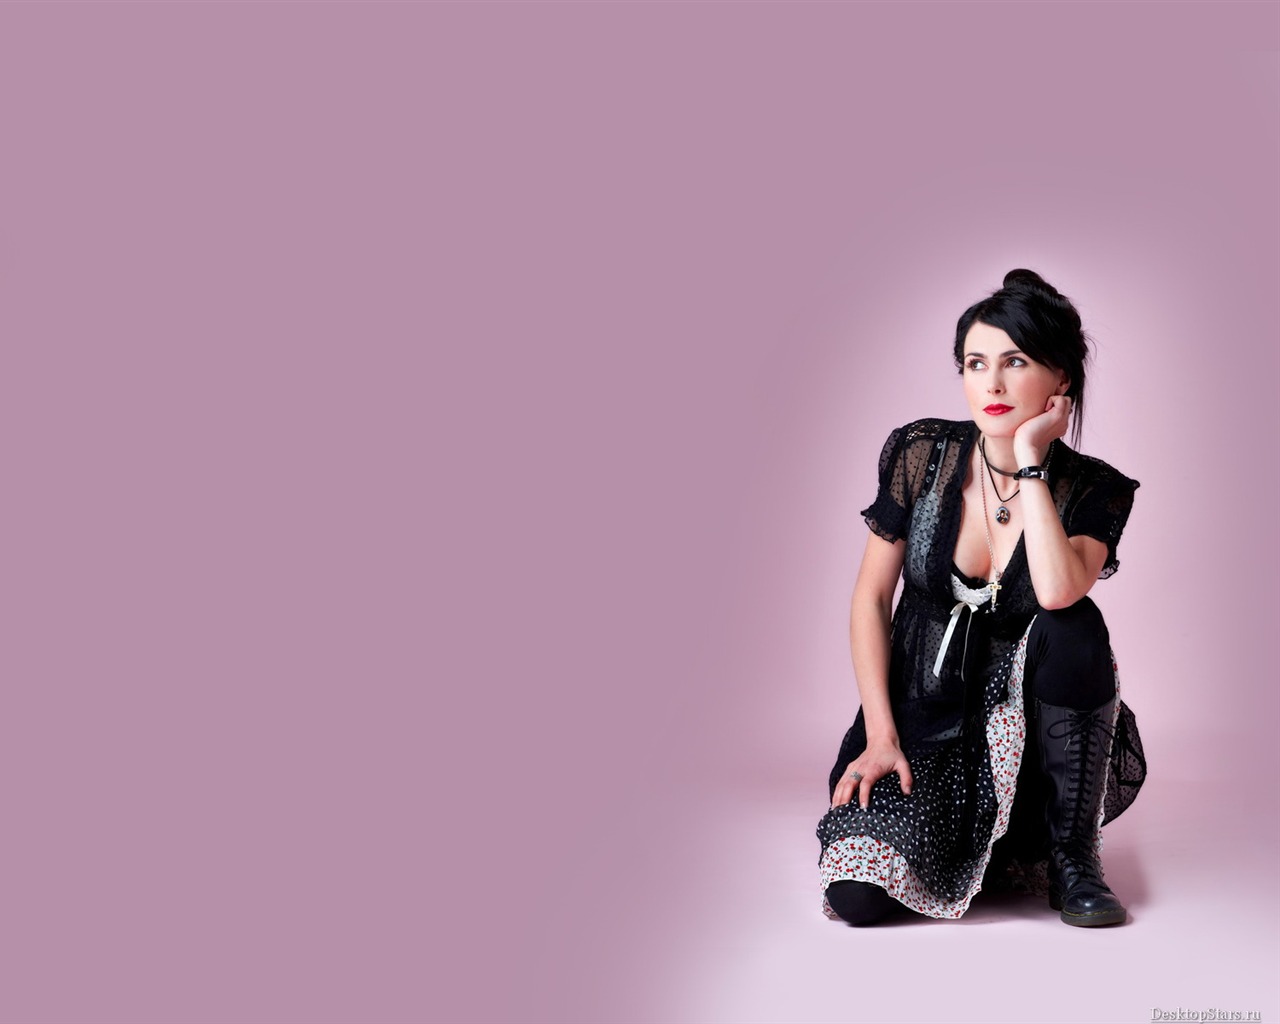 Sharon den Adel #010 - 1280x1024 Wallpapers Pictures Photos Images